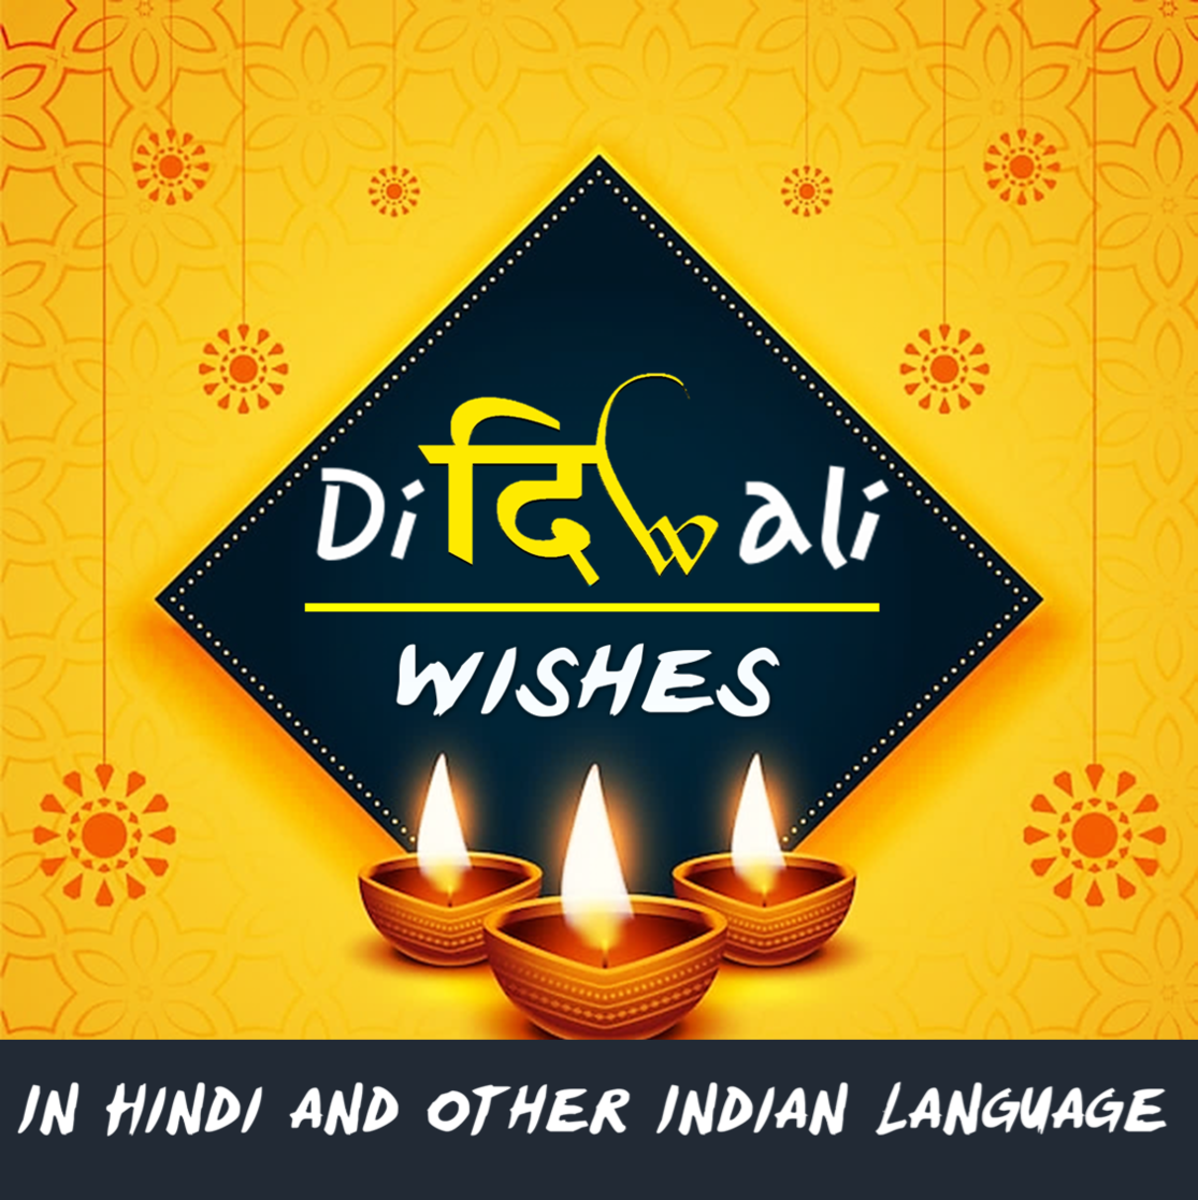 Diwali Wishes in Hindi and Other Indian Languages